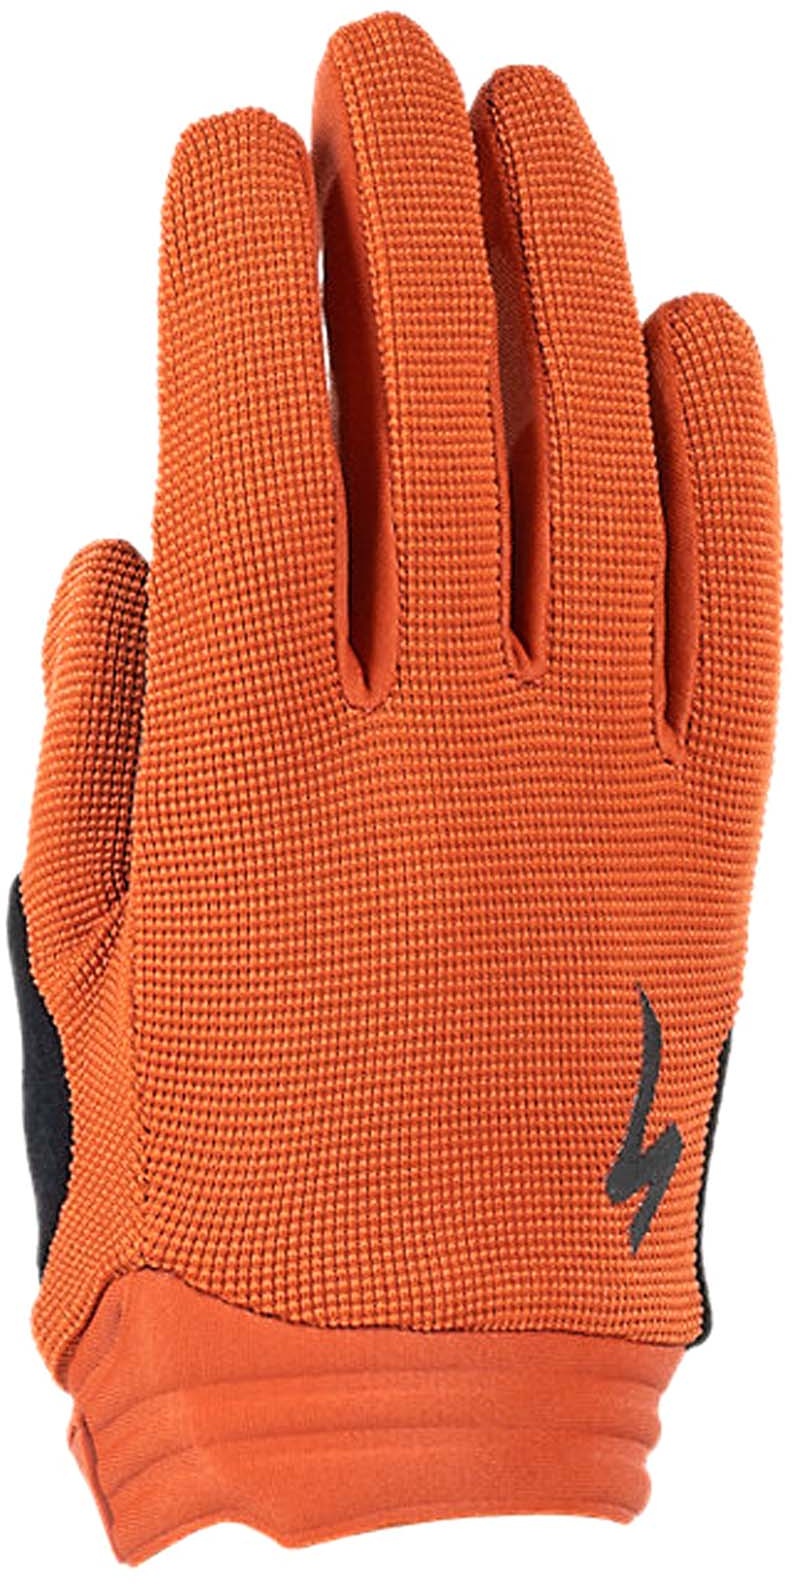 Specialized Youth Trail Handschuhe langfinger | redwood - Youth L